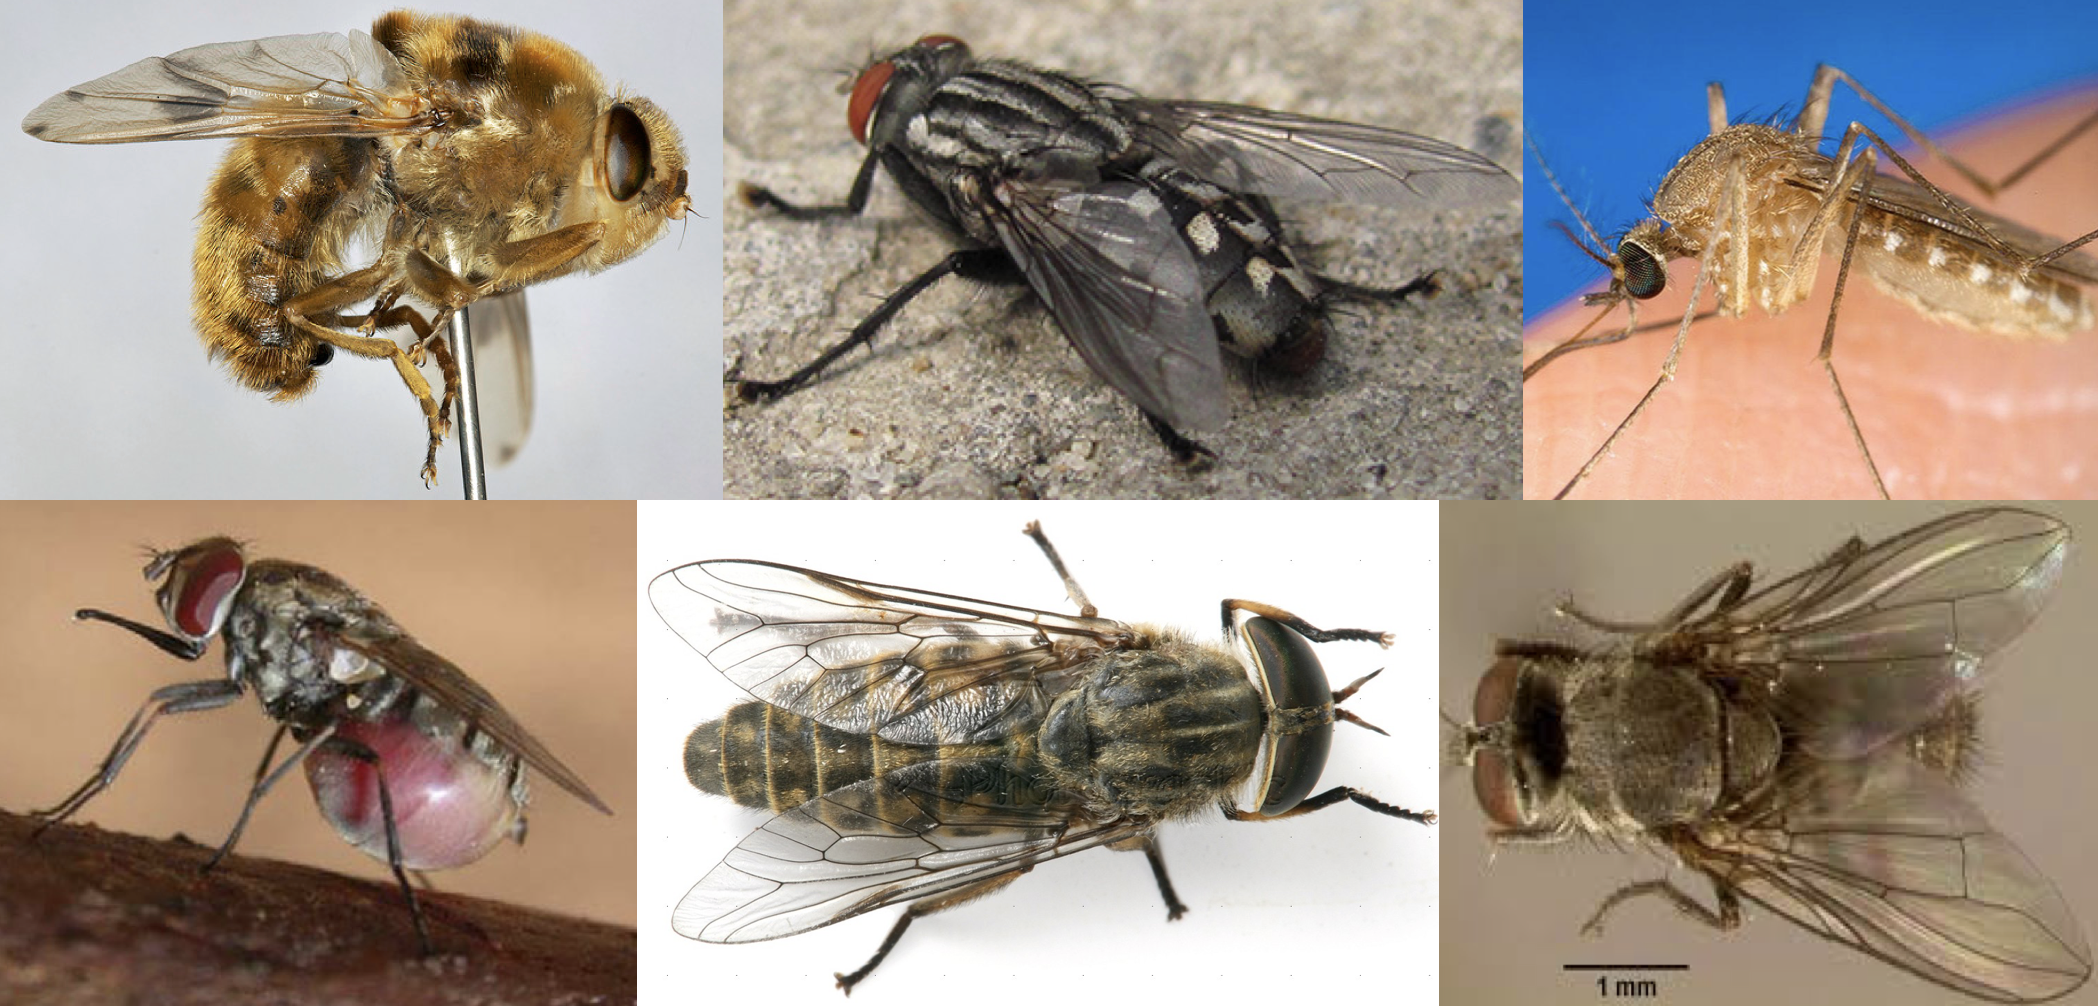 Botfly, Face fly, Mosquito, Stable Fly, Horse Fly, and Horn Fly